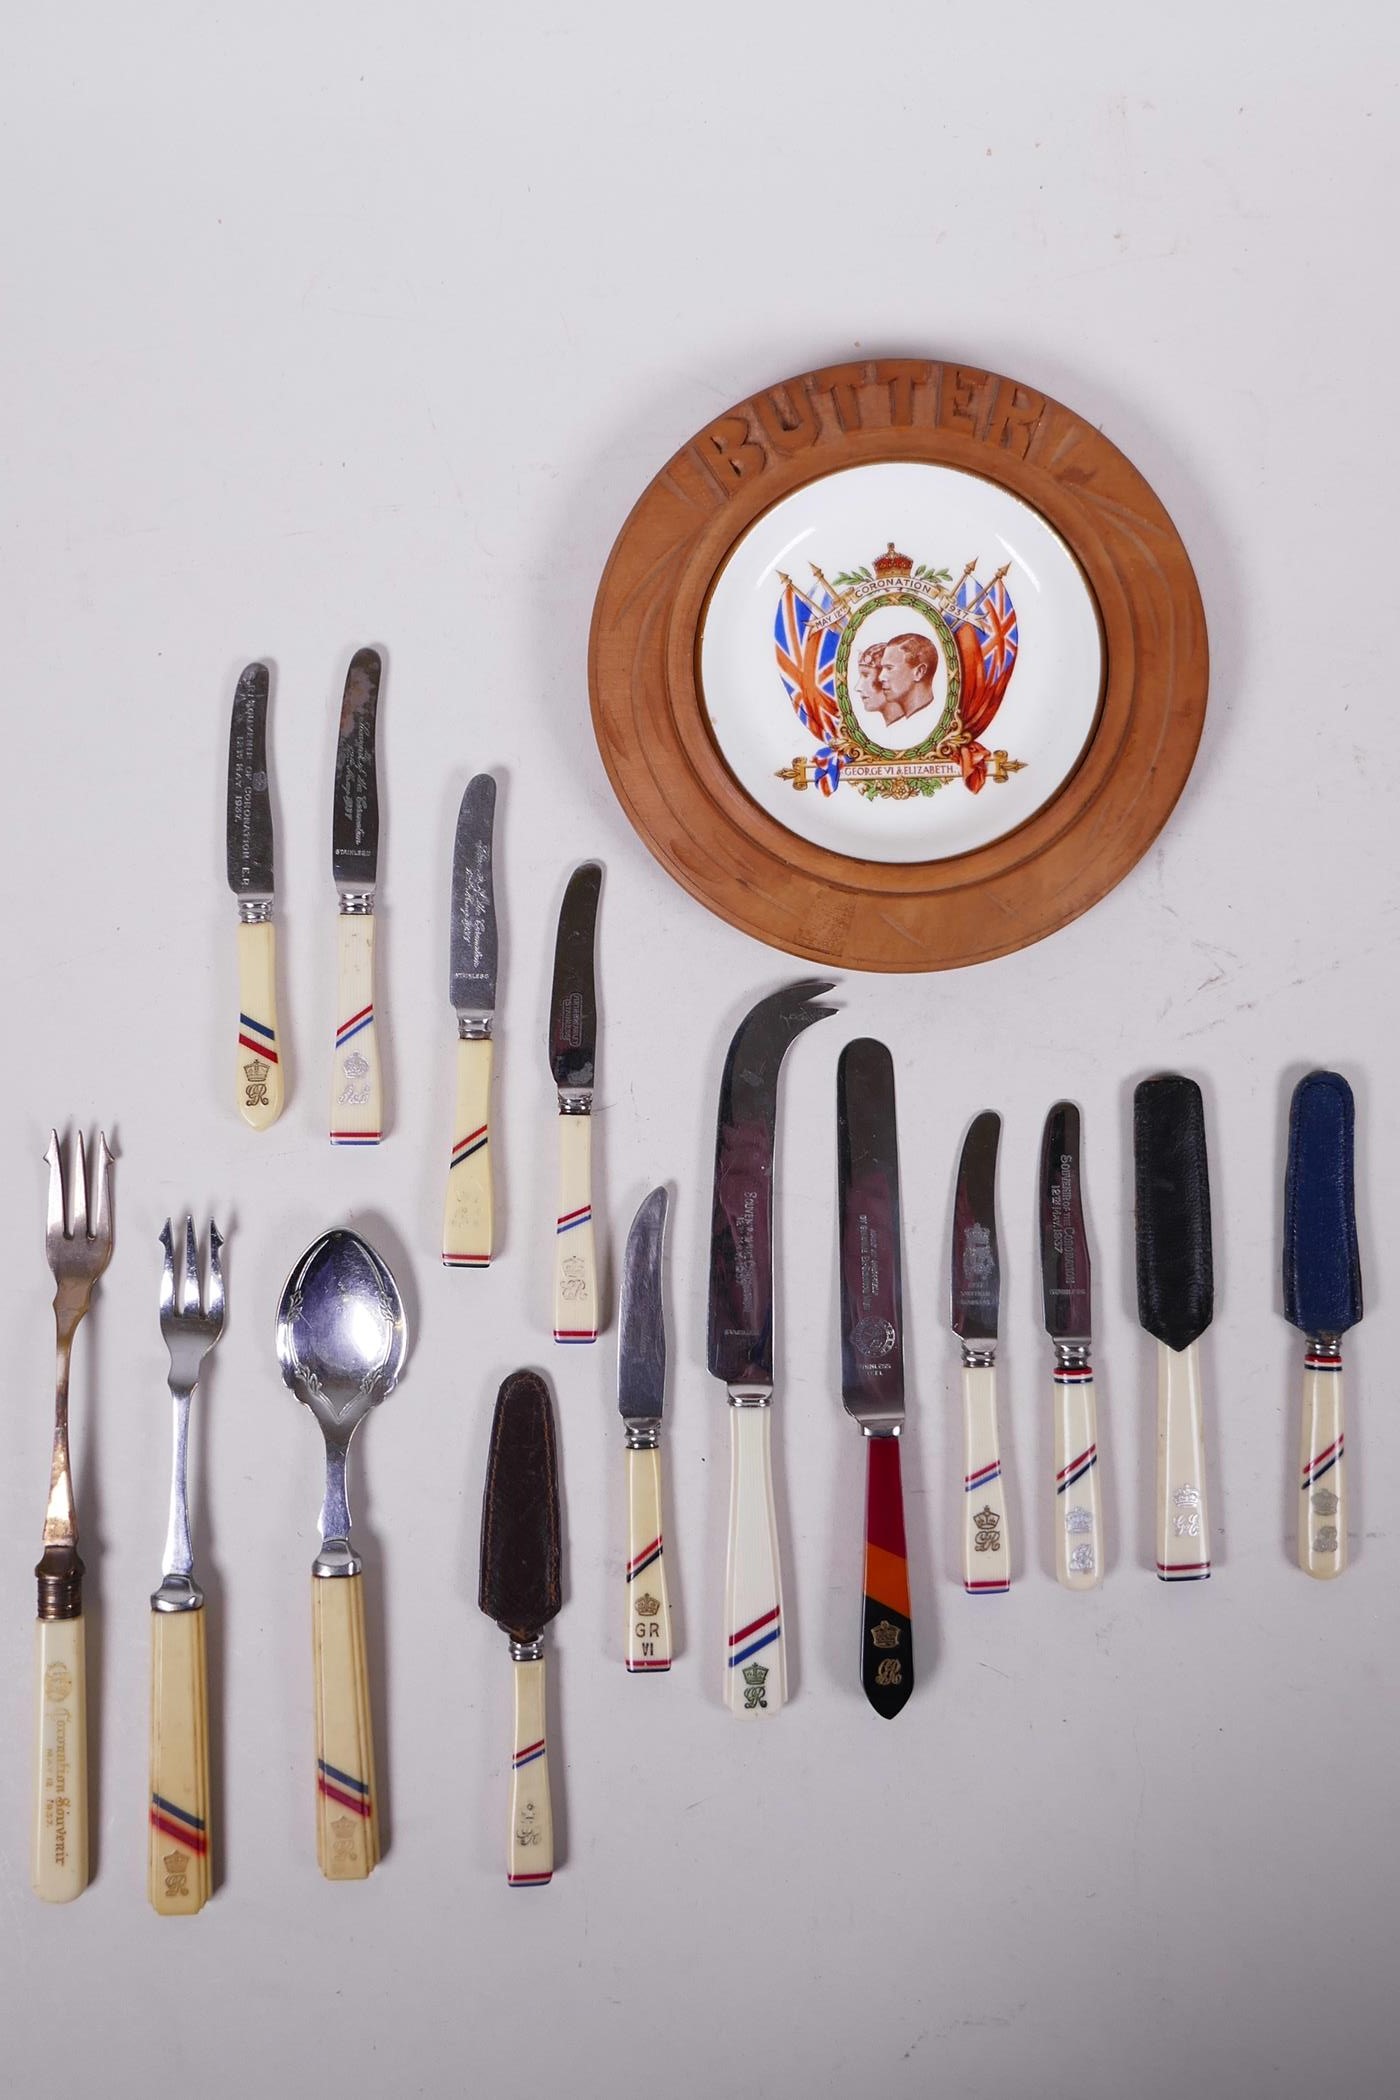 A variety of souvenir coronation 1937 cream Bakelite or bone handled butter and fruit knives